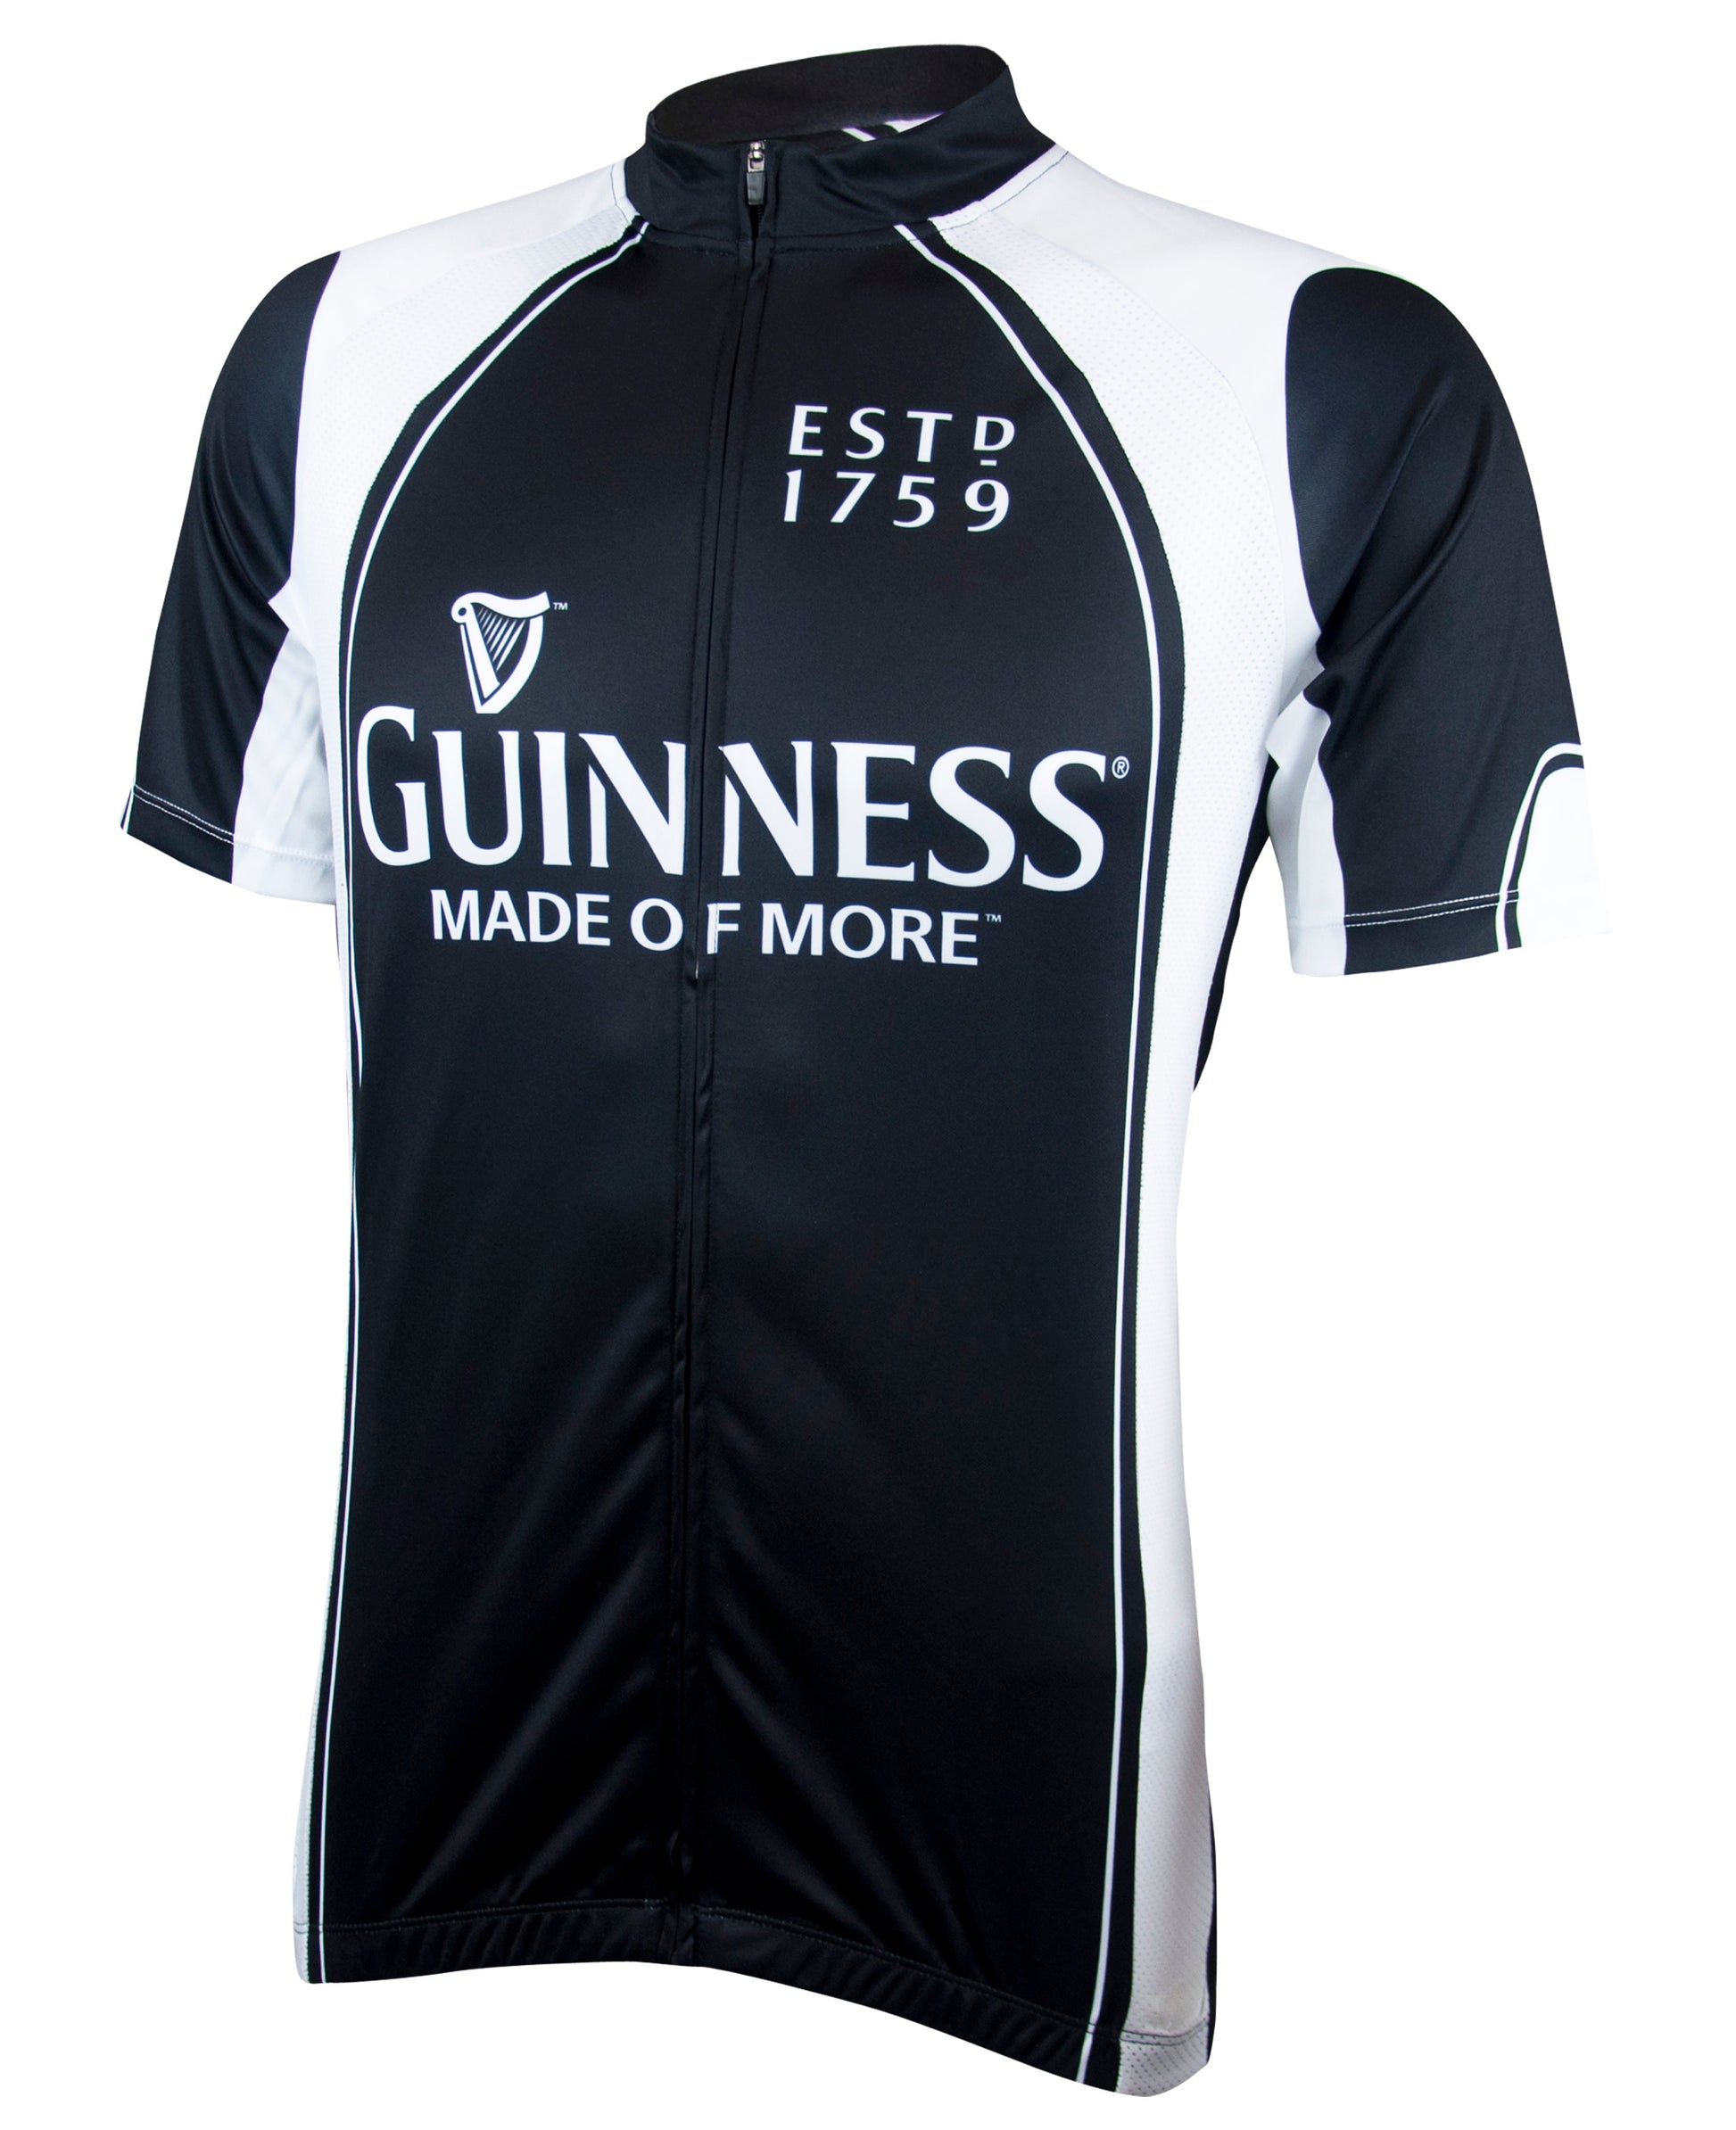 This race cut Guinness UK cycling jersey delivers top performance results.